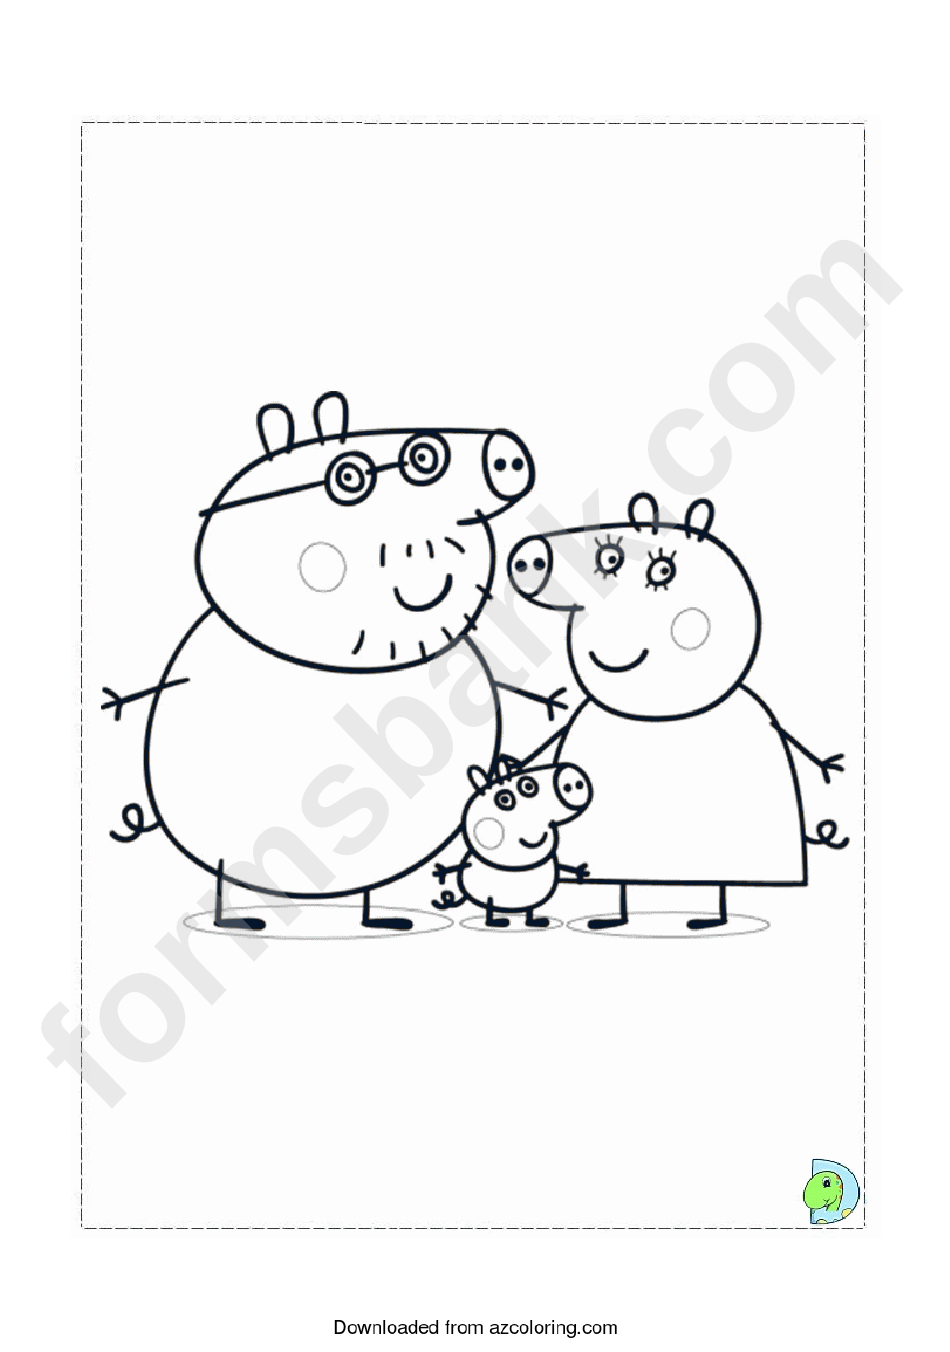 Peppa Pig Coloring Page